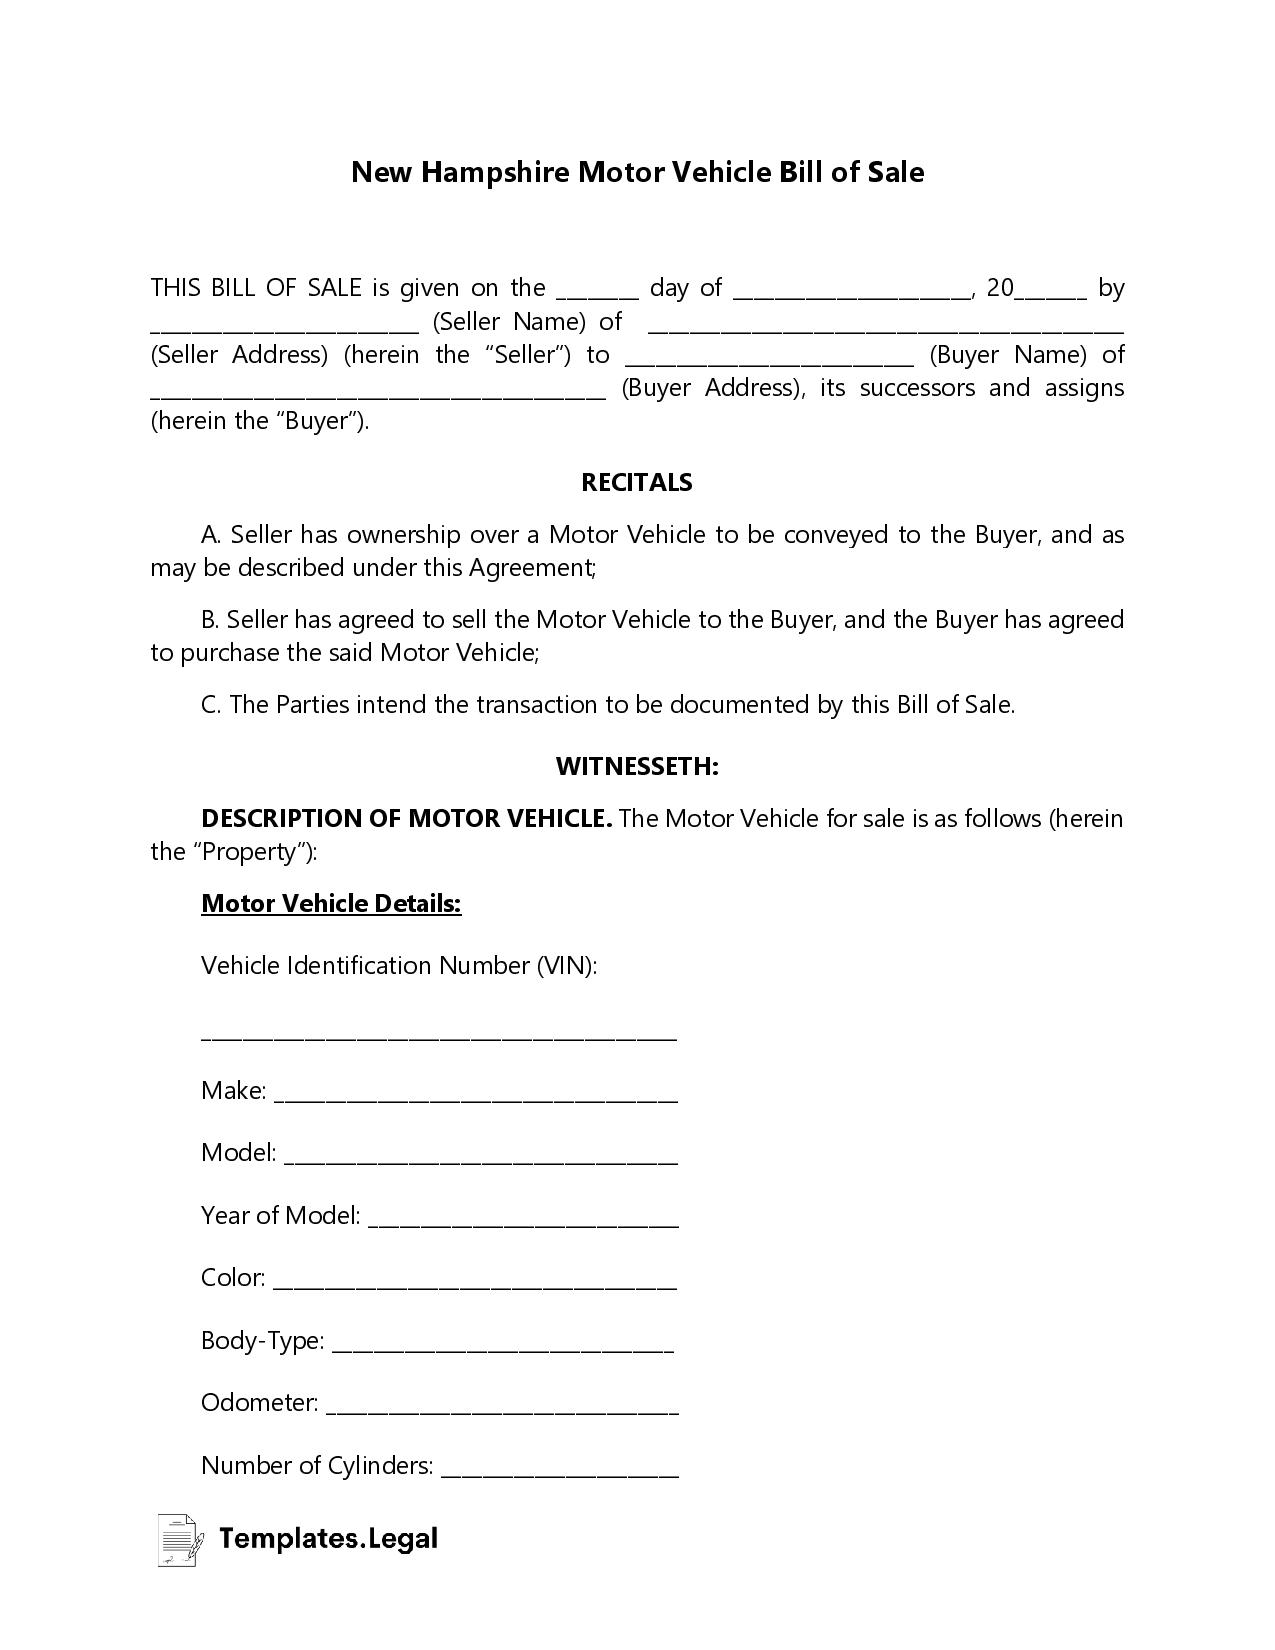 New Hampshire Motor Vehicle Bill of Sale - Templates.Legal